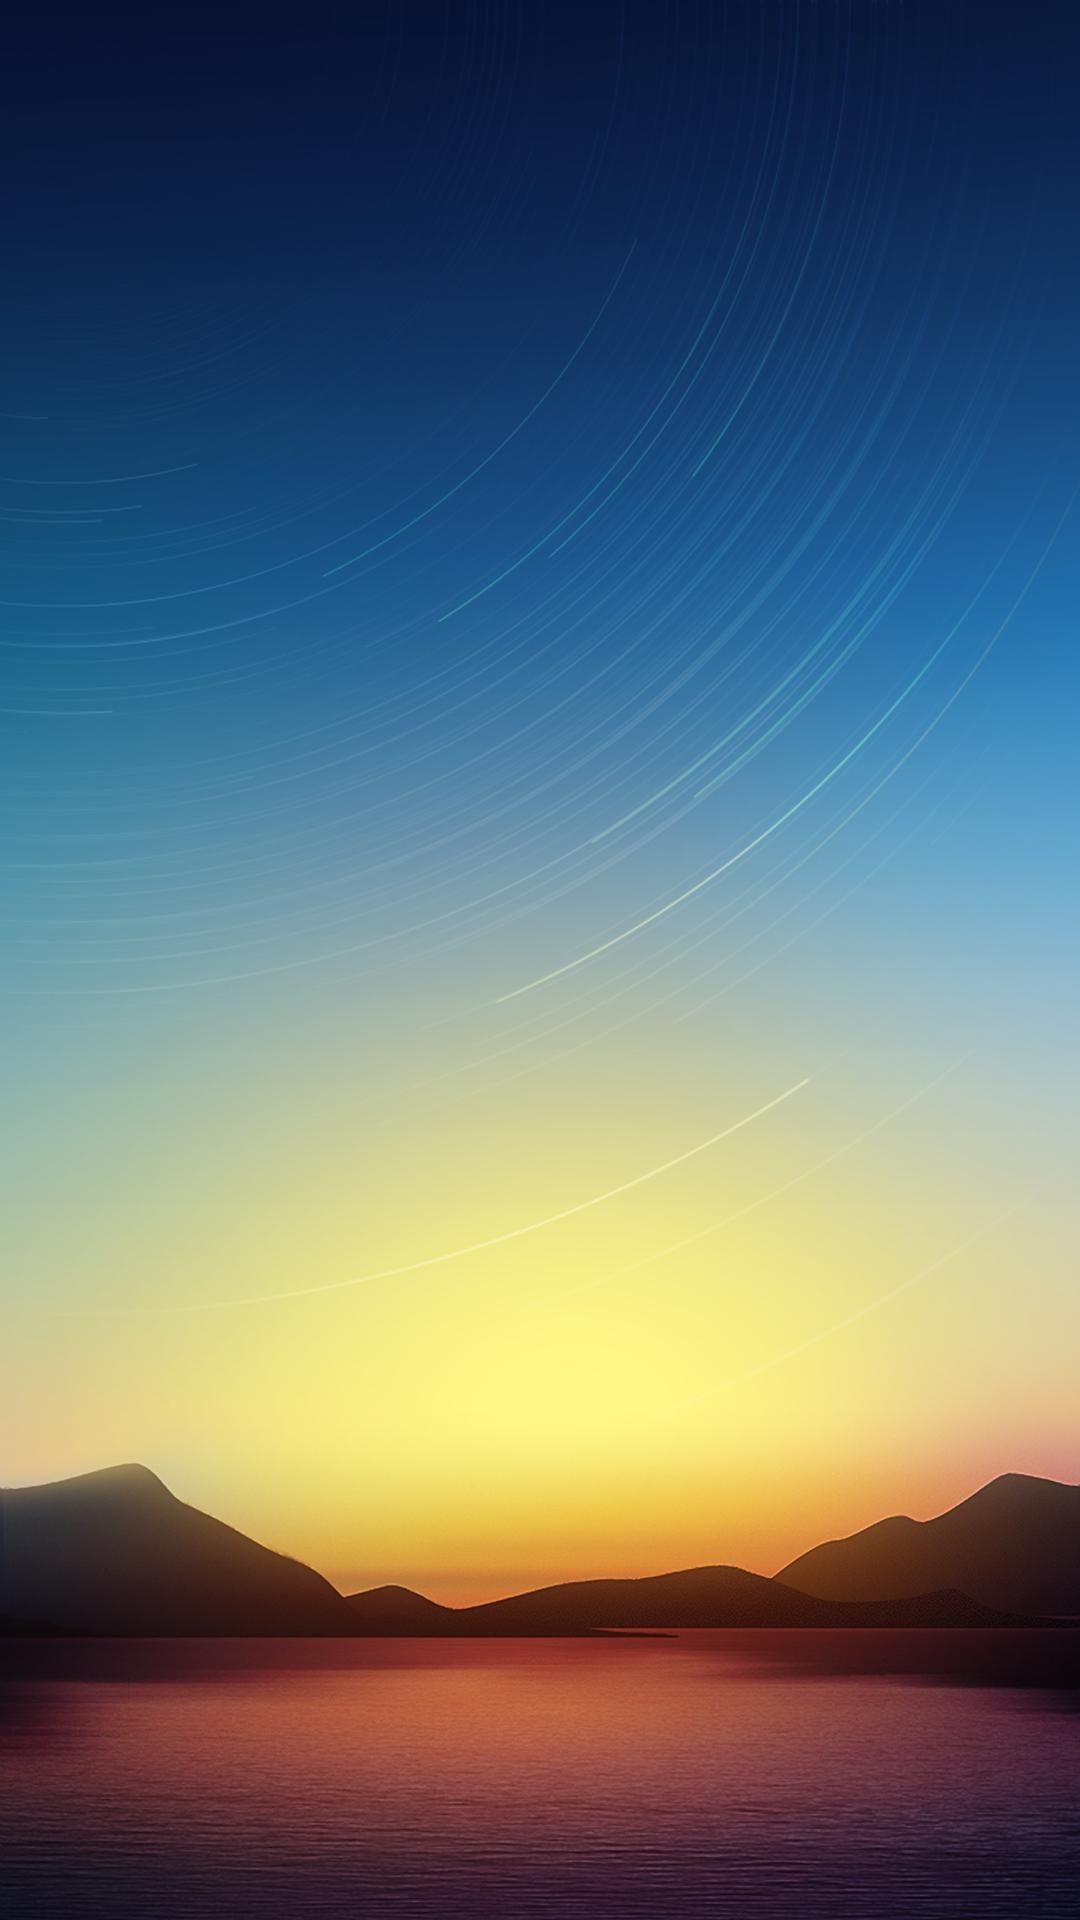 1080x1920 Upgrade Your Screen Size with These Large Phone Wallpapers